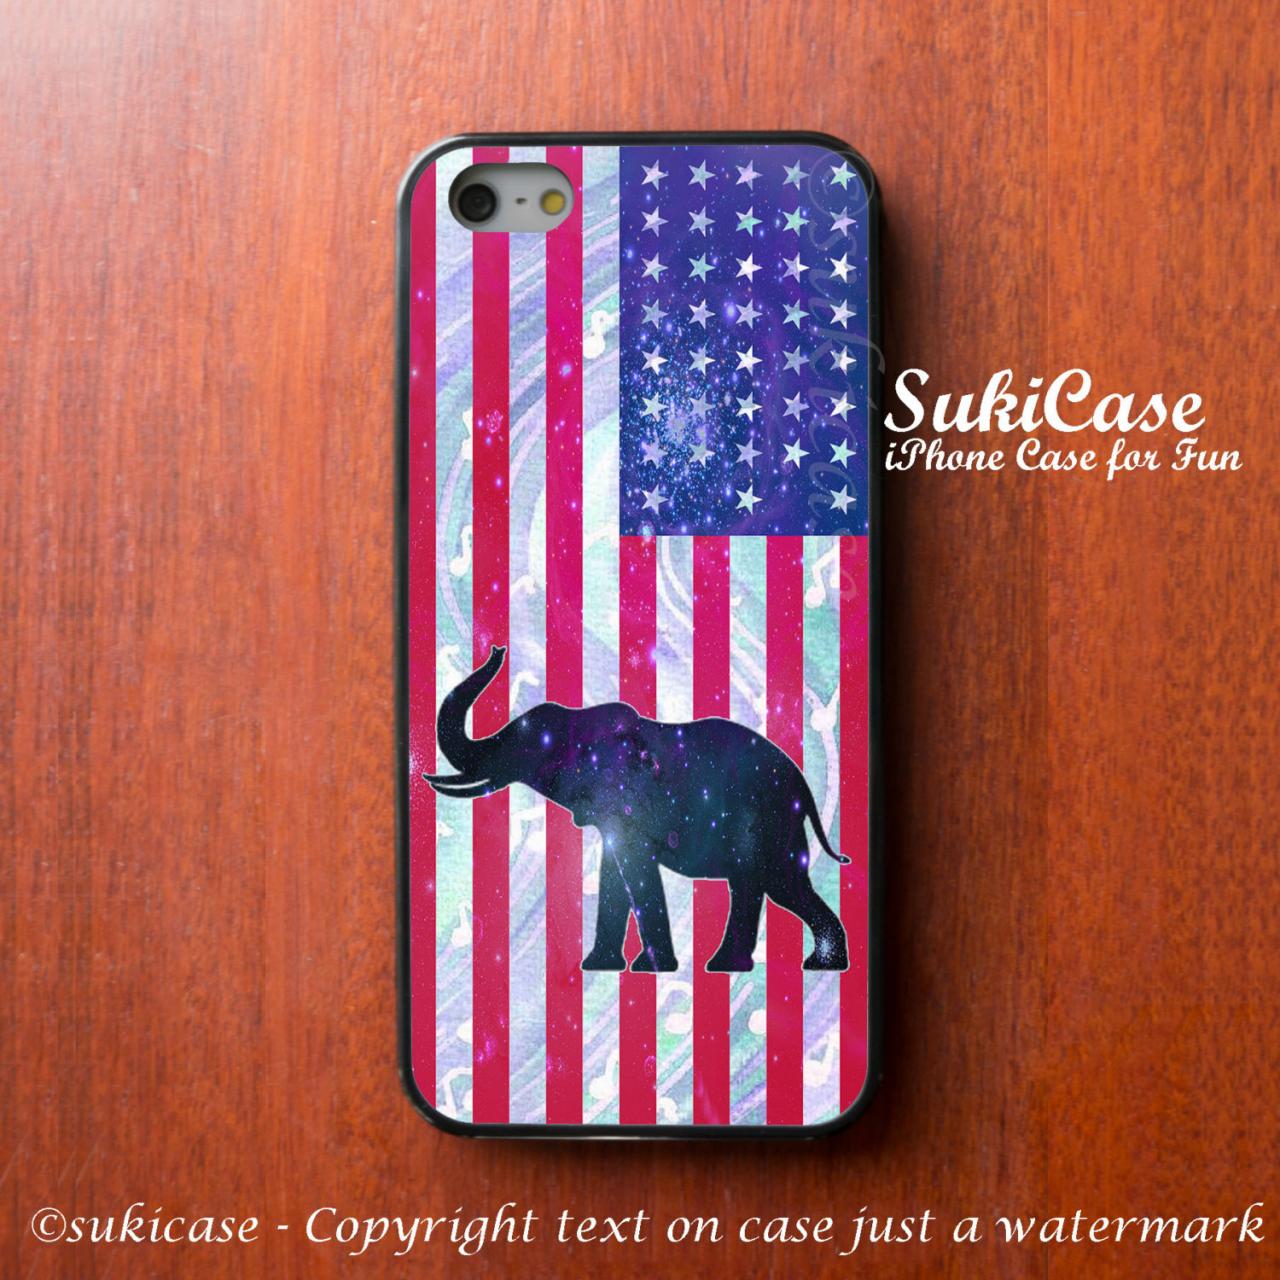 Iphone 5s Case United State Elephant On Star Galaxy Flag Iphone Case Iphone 5 Case Samsung Galaxy S4 S3 Cover Iphone 5c Iphone 4s Iphone 4